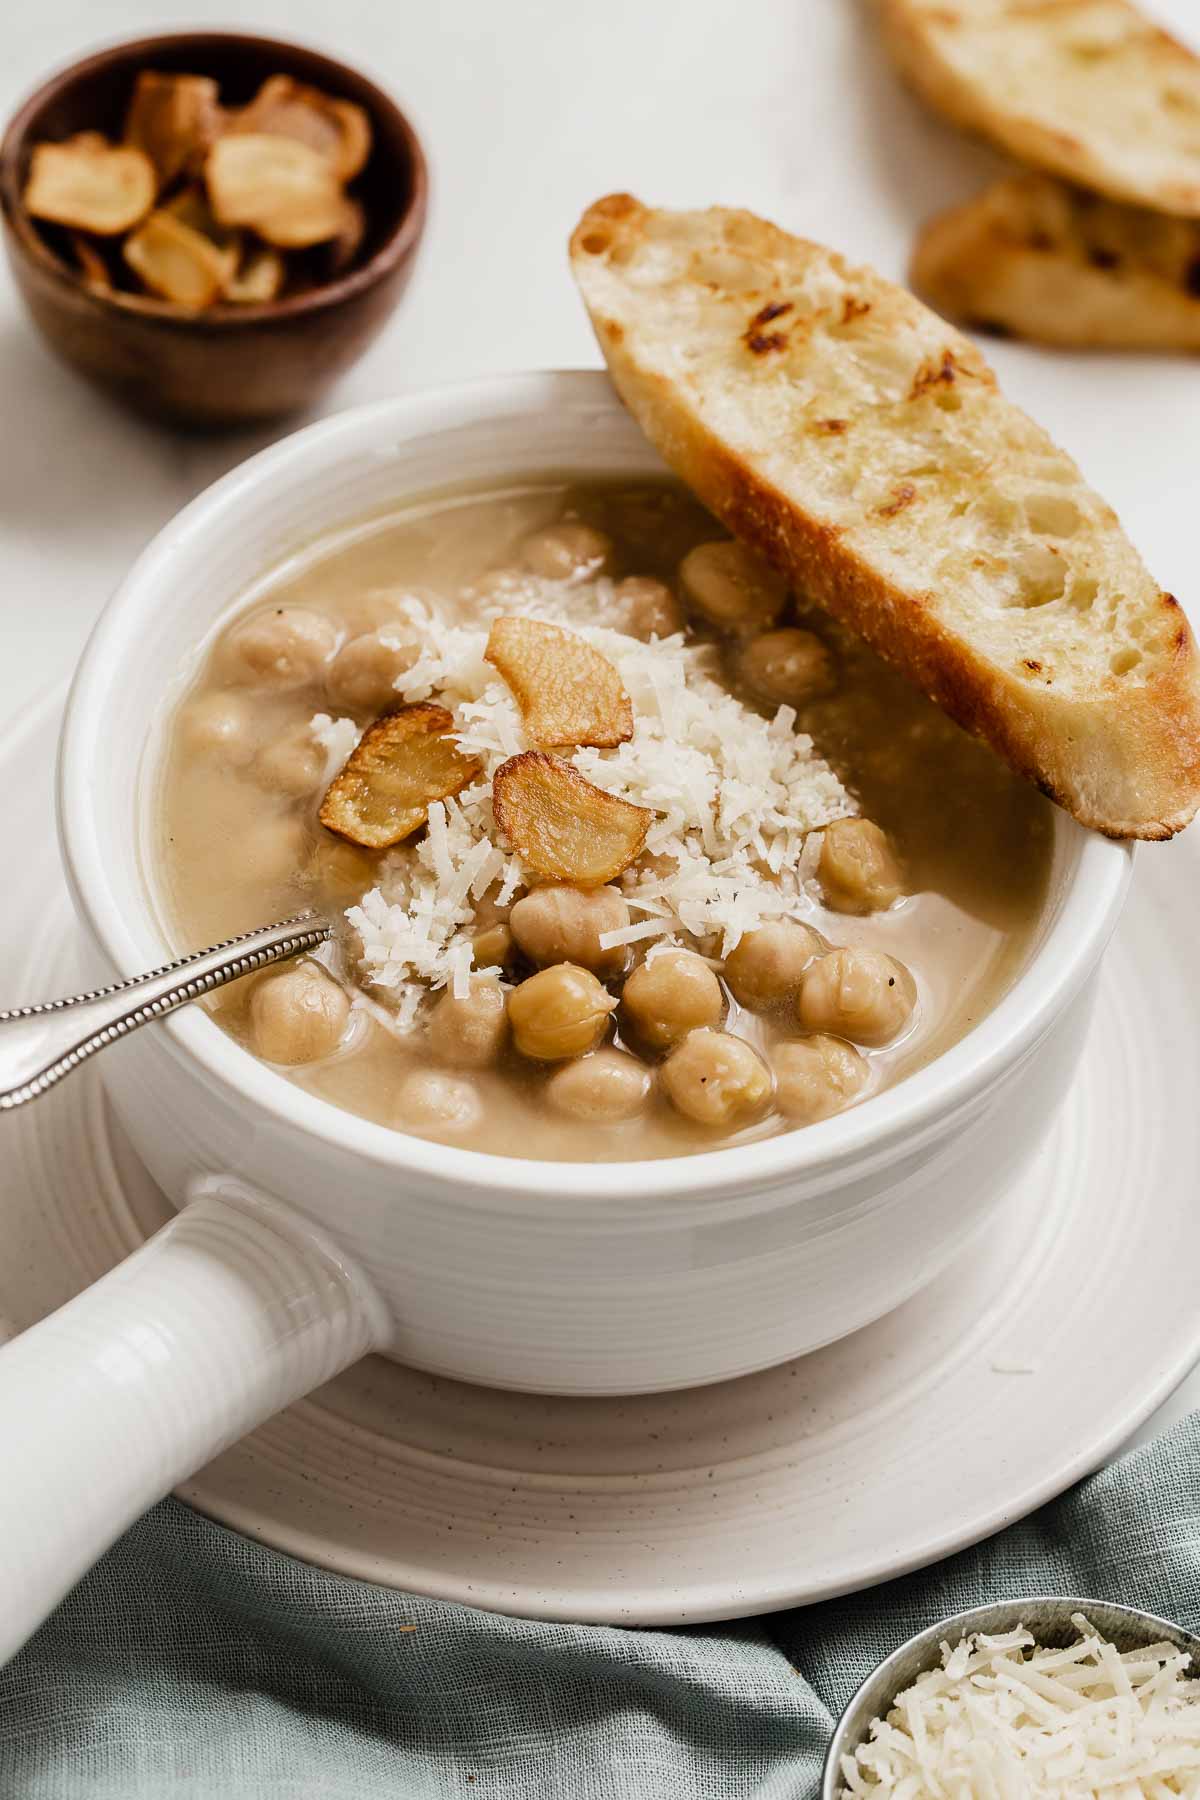 Image of chickpea soup with Parmesan and toasted garlic chips on top of bowl.